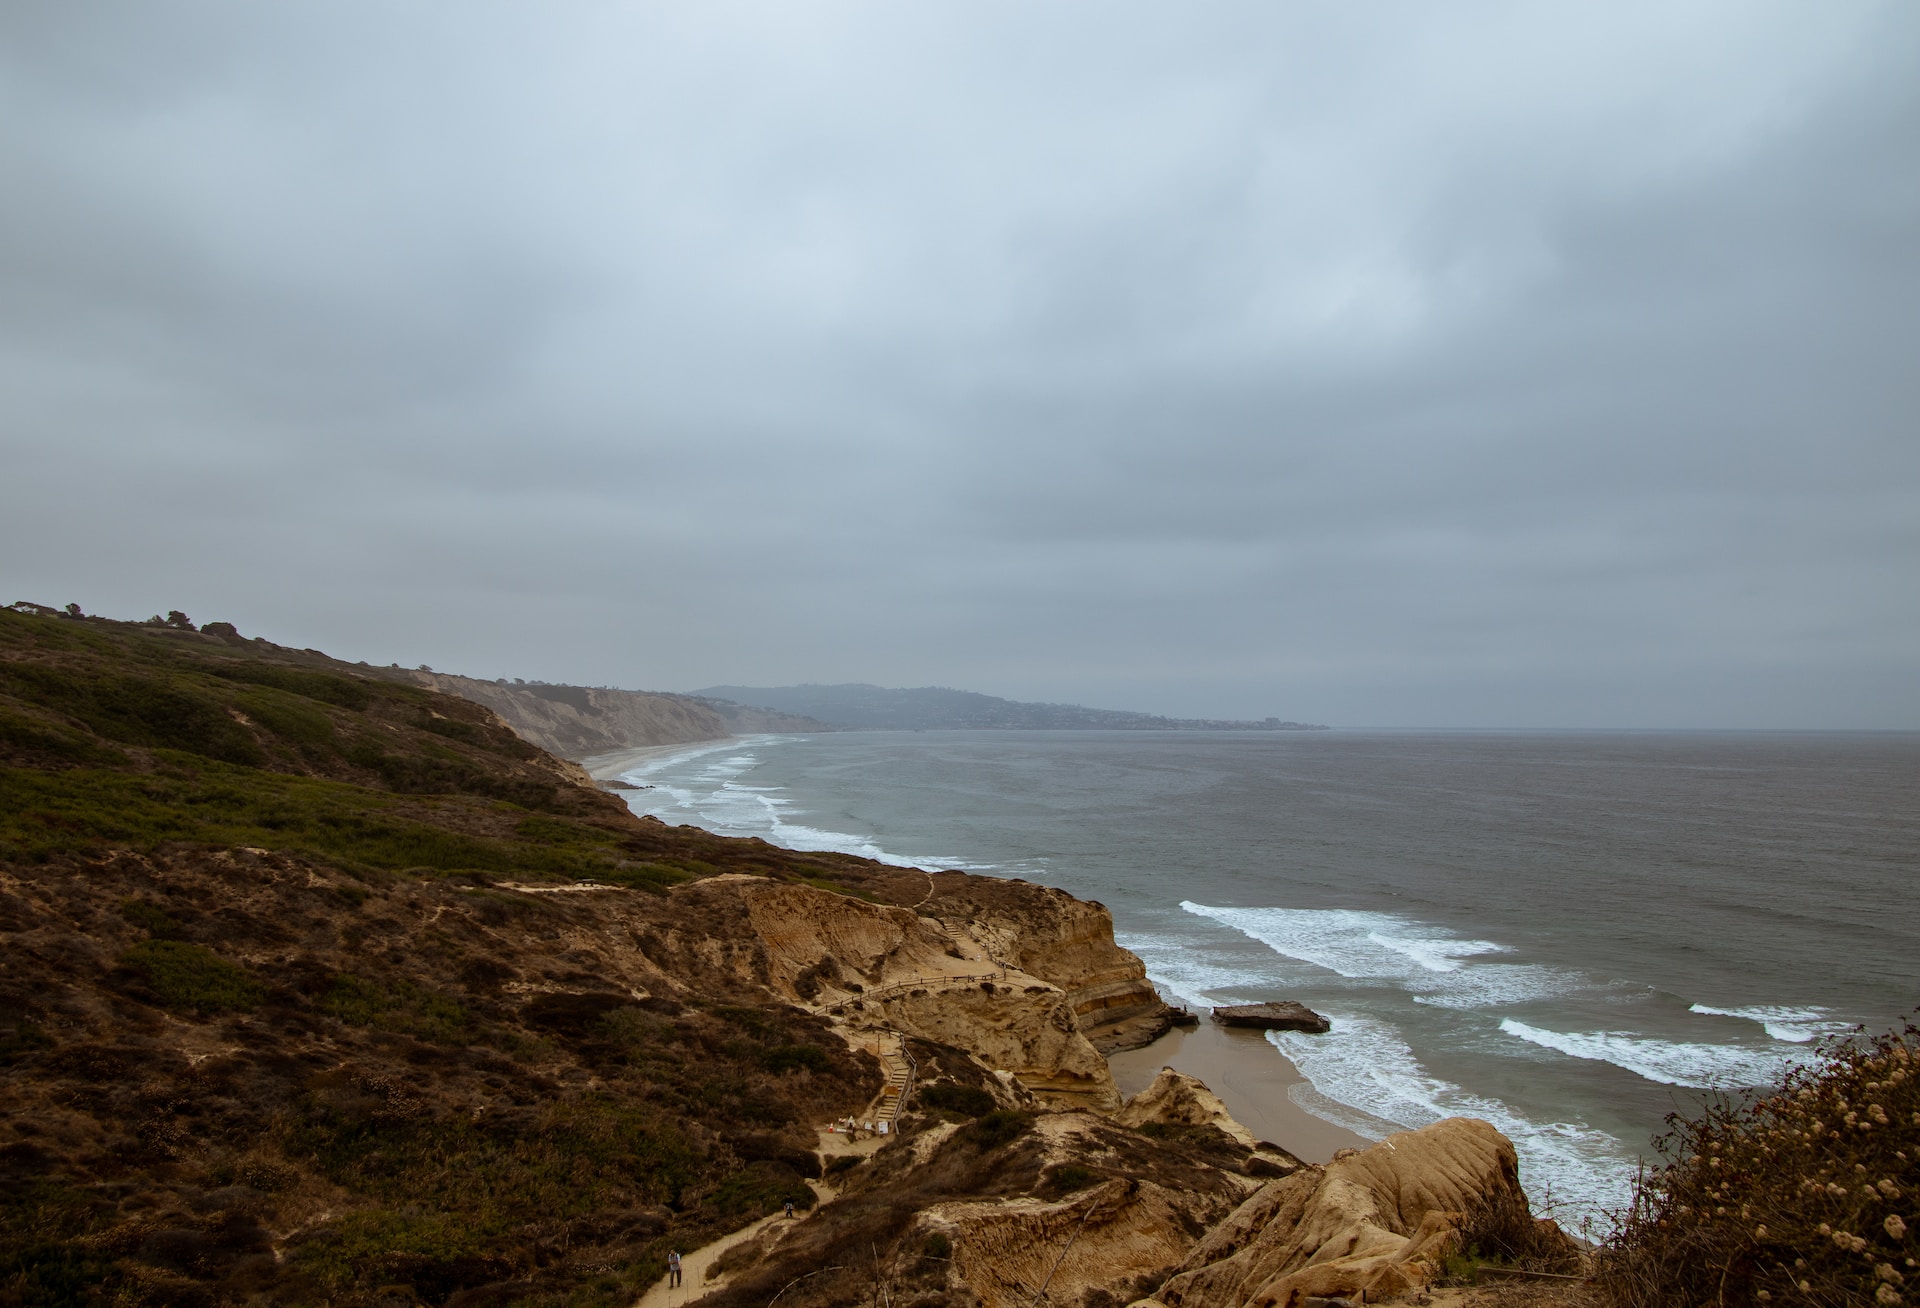 What To Do at La Jollas Torrey Pines State Natural Reserve